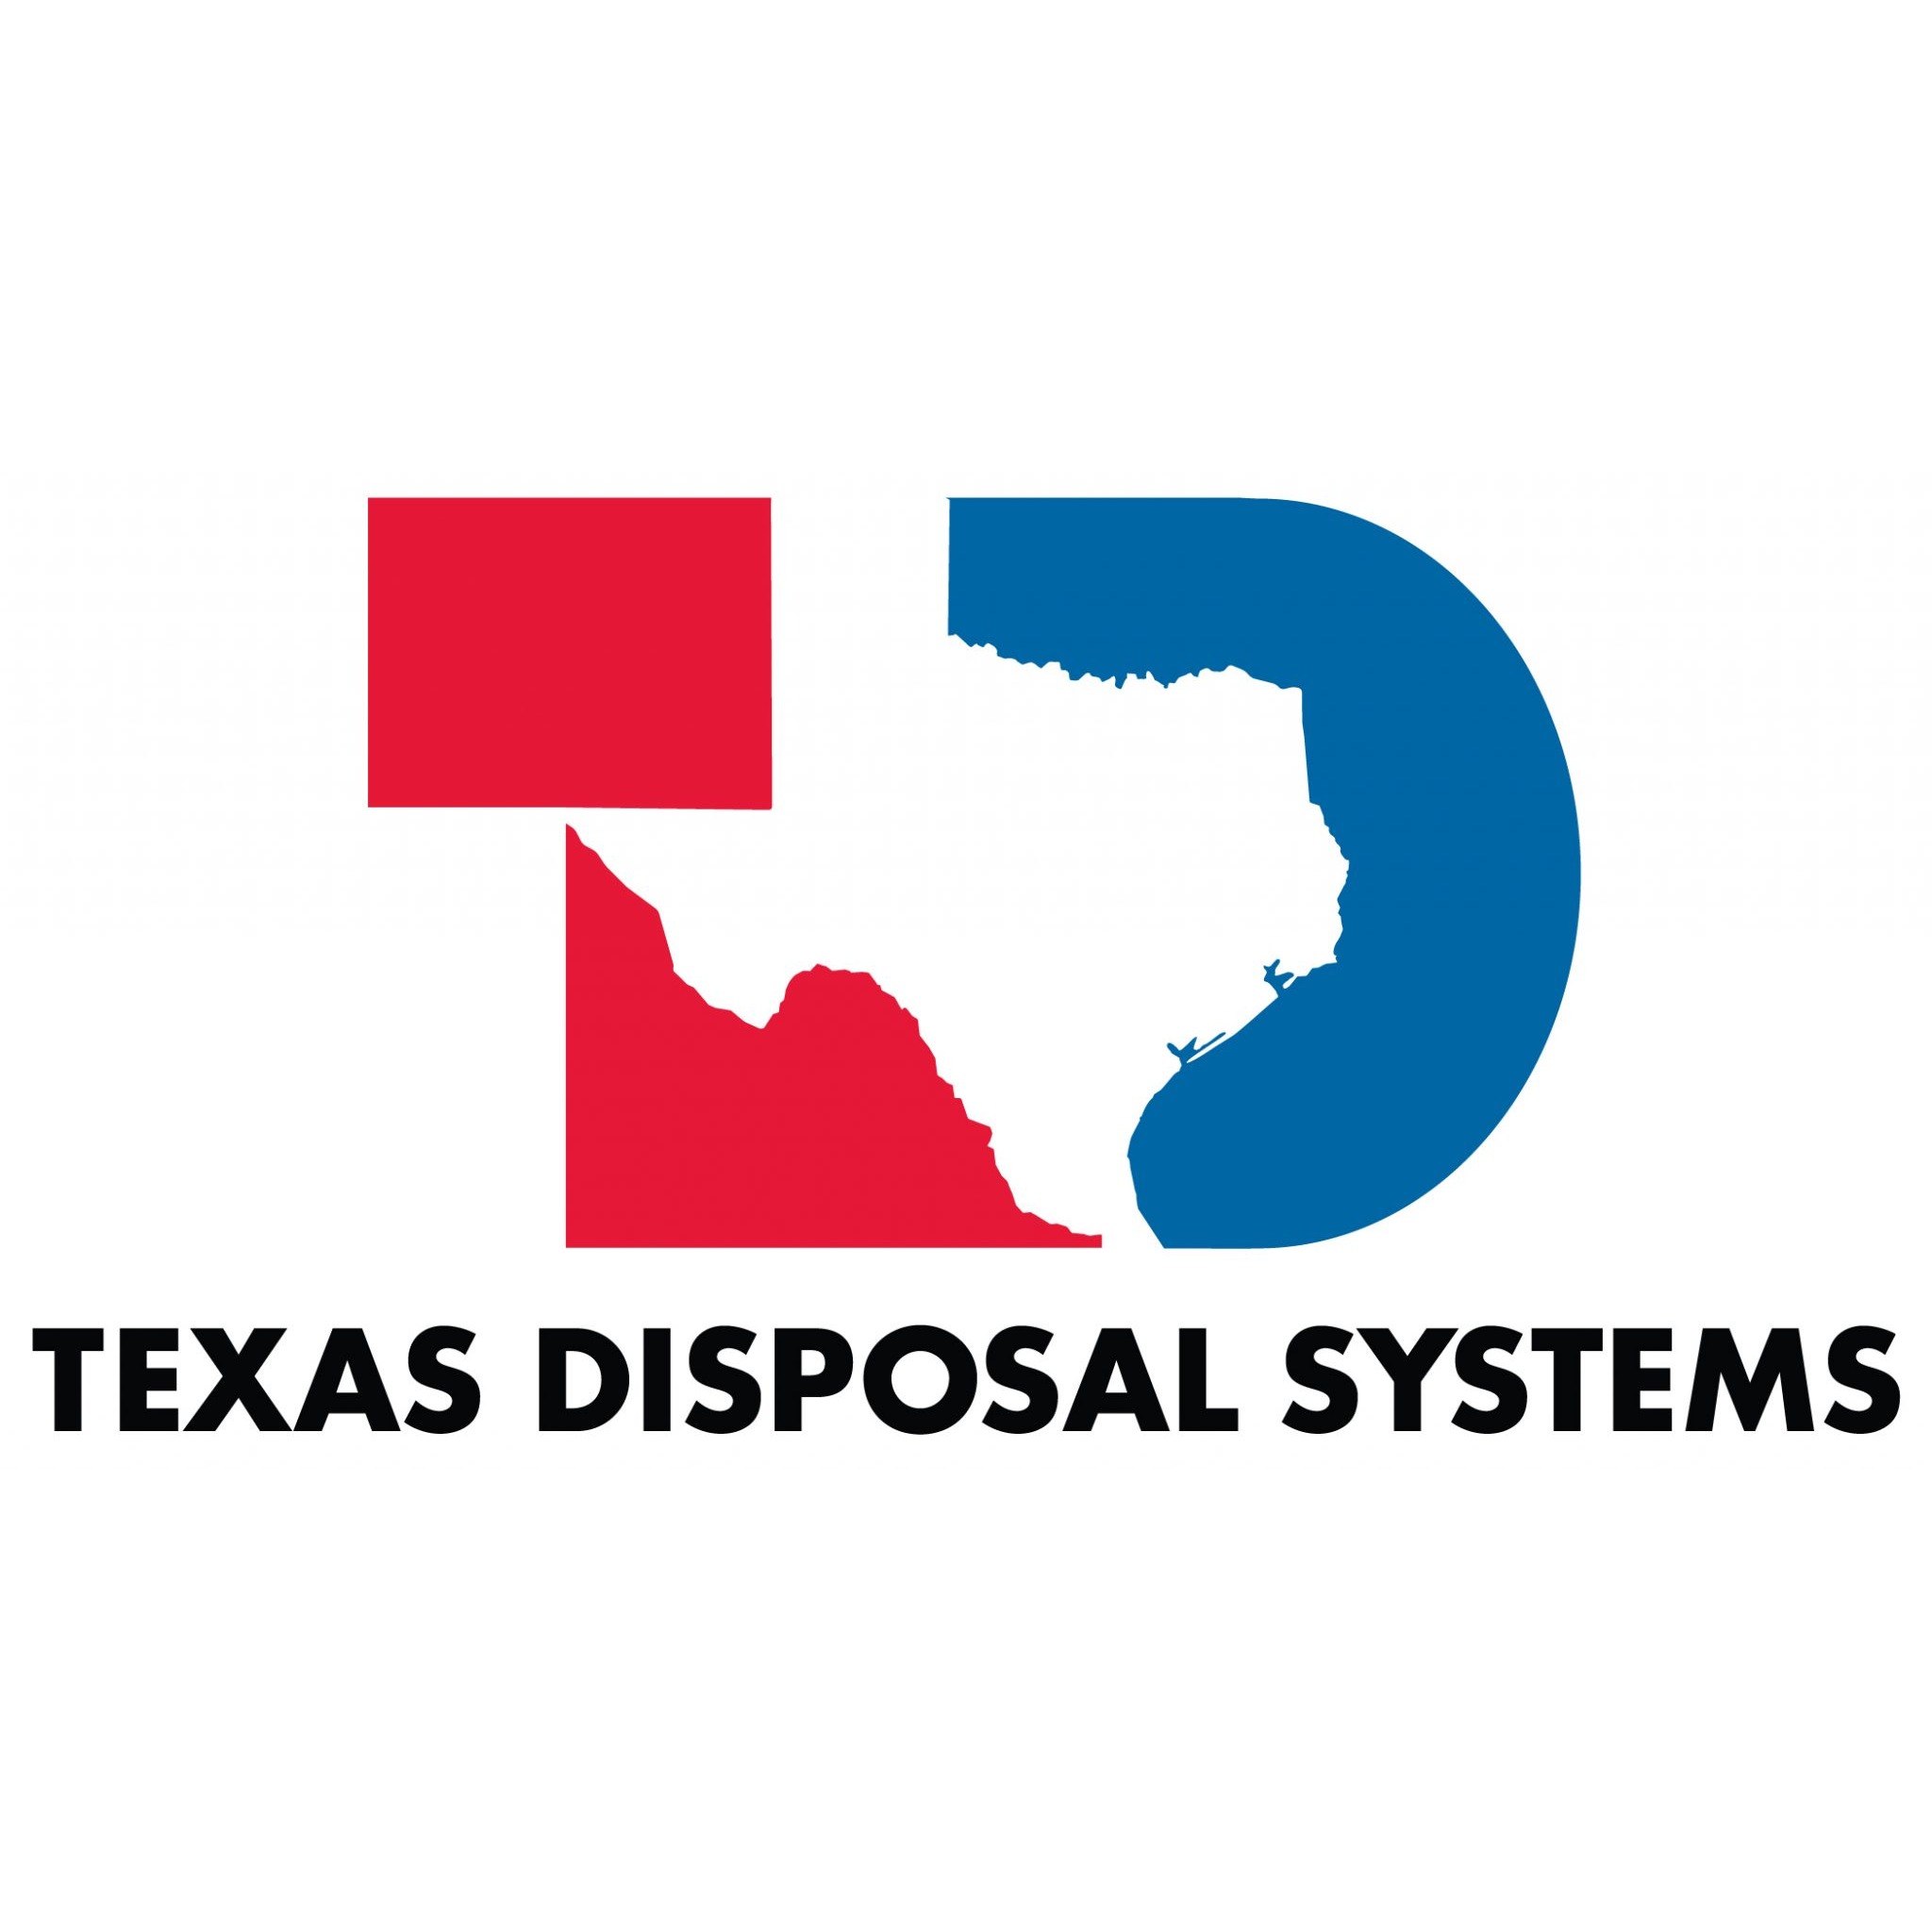 Texas Disposal Systems Materials Recovery Facility